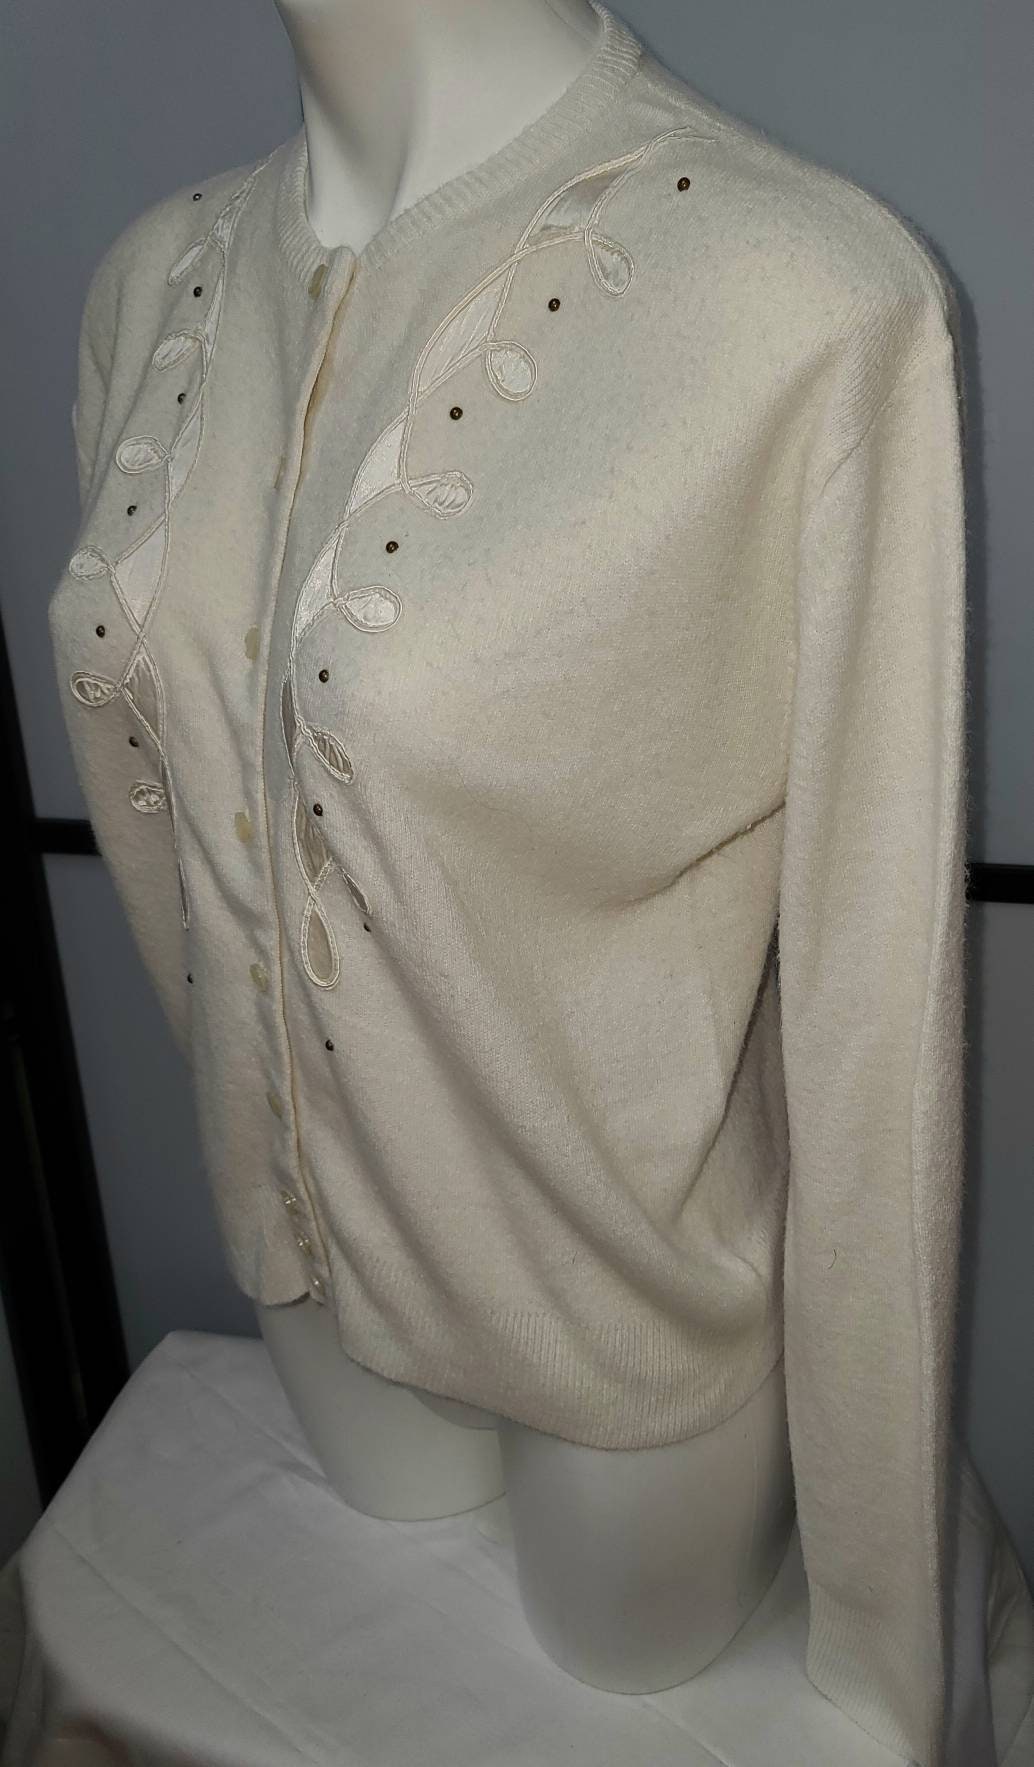 Vintage 1950s Sweater White Orlon Cardigan Embroidered Satin Designs Rockabilly Pinup L